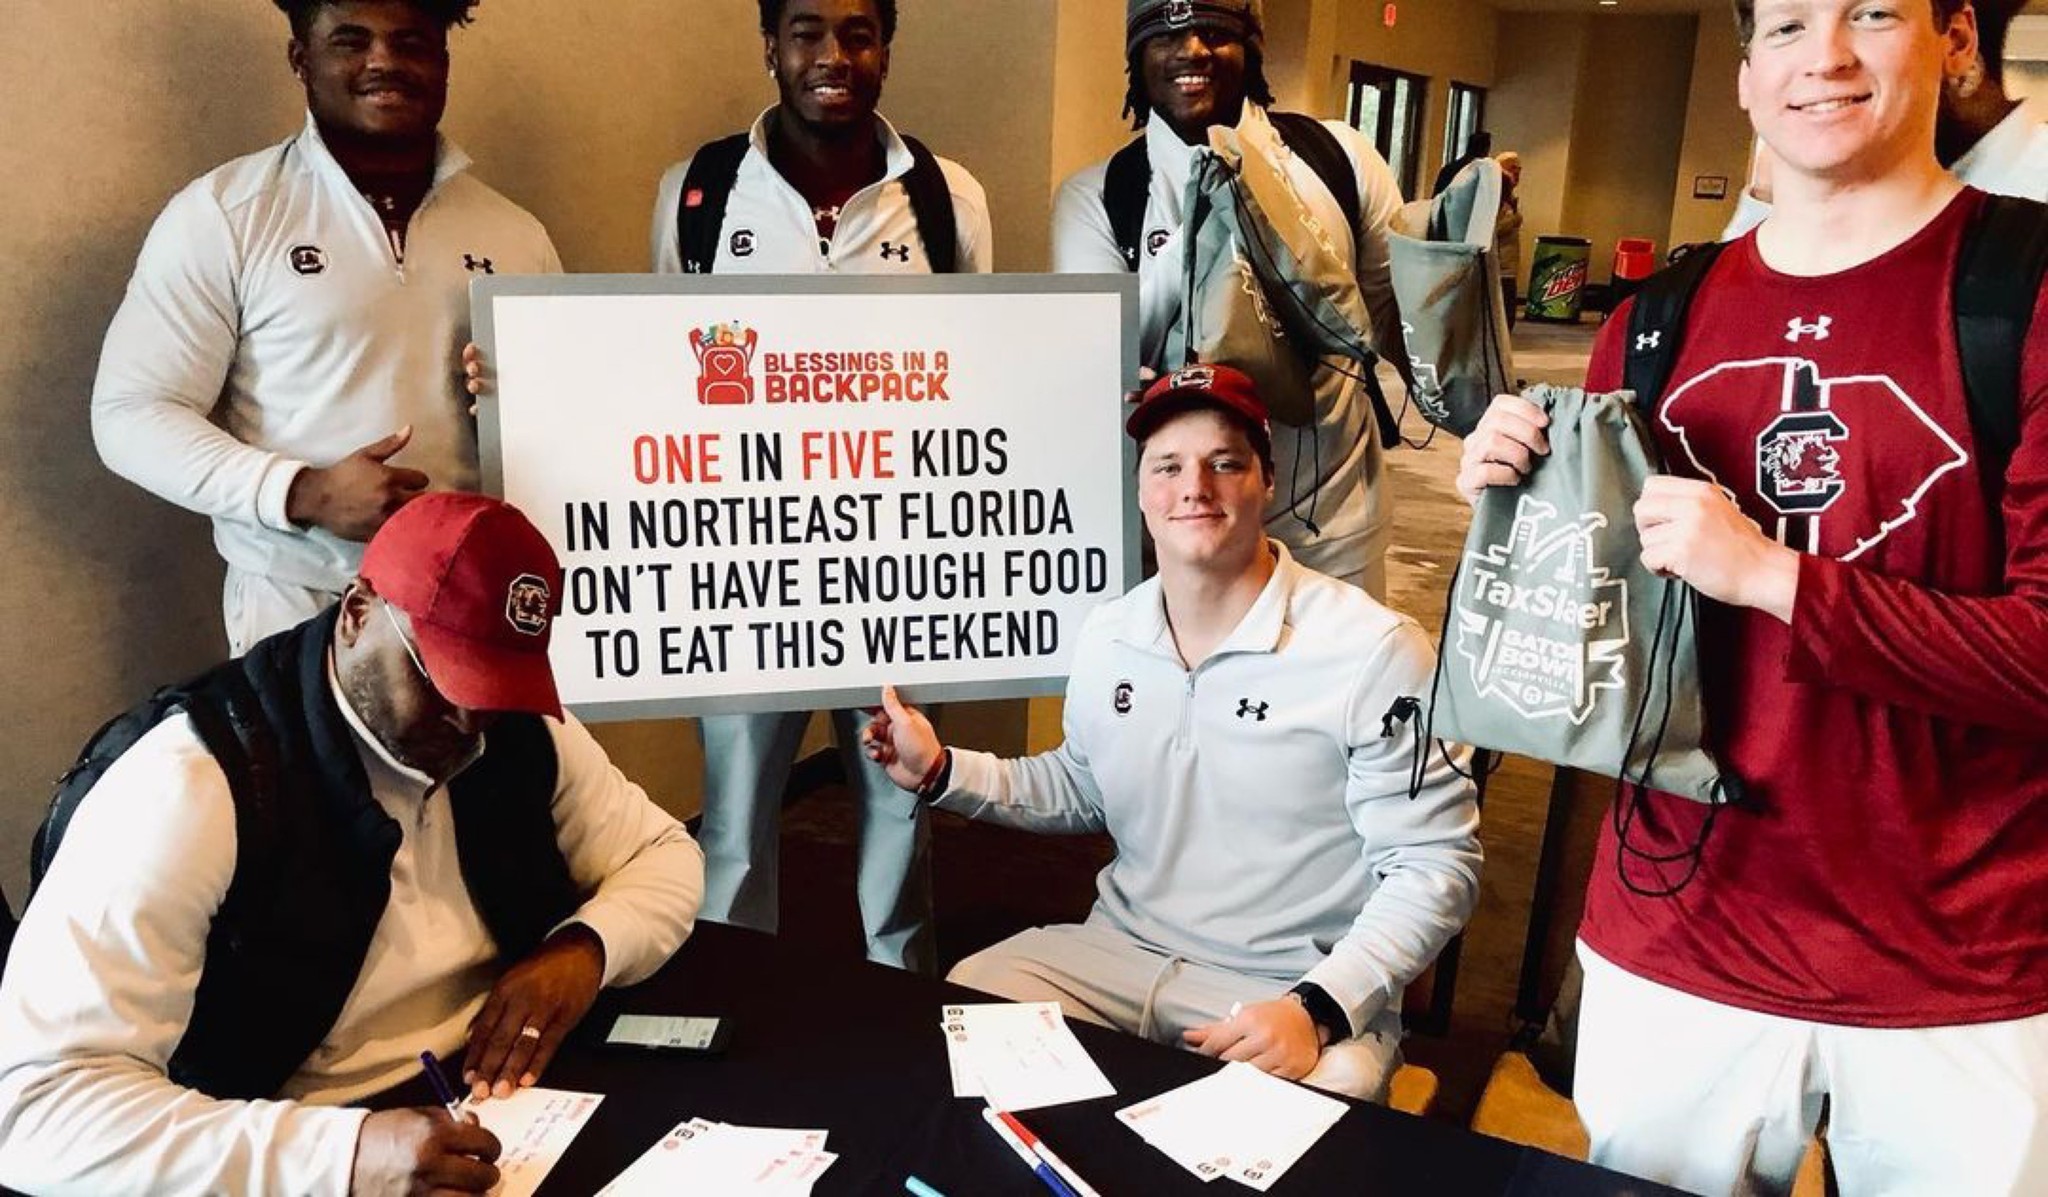 Gamecock Football Team Gives Back to First Coast Kids Ahead of Gator Bowl